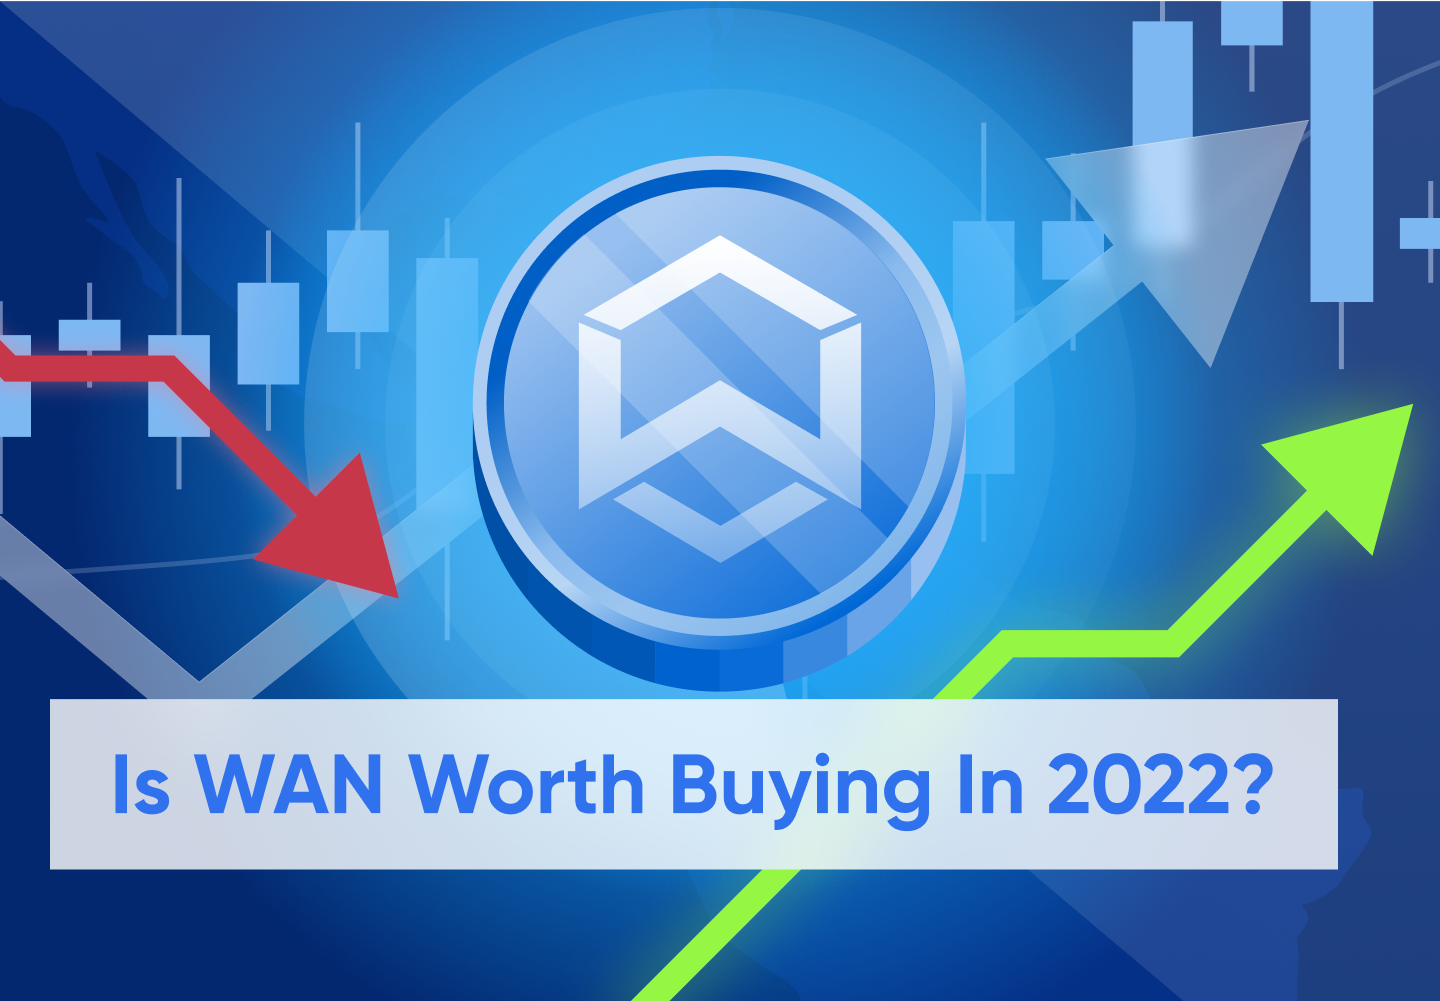 Wanchain Price Prediction 2022: Long Term Price Prediction From 2022-2030